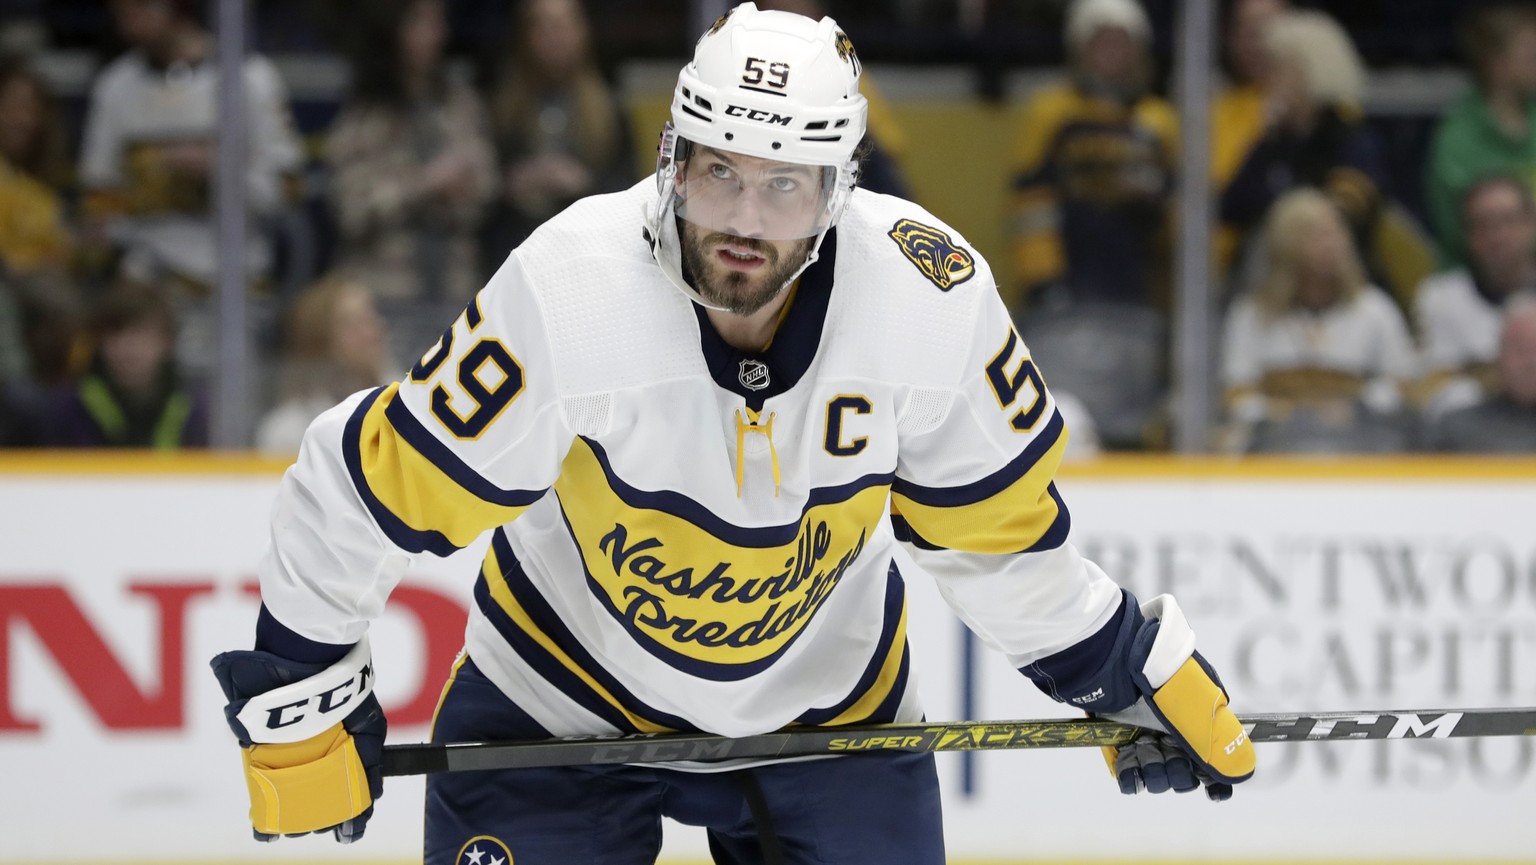 FILE - In this Sunday, Feb. 16, 2020 file photo, Nashville Predators defenseman Roman Josi, of Switzerland, plays against the St. Louis Blues in the third period of an NHL hockey game in Nashville, Te ...